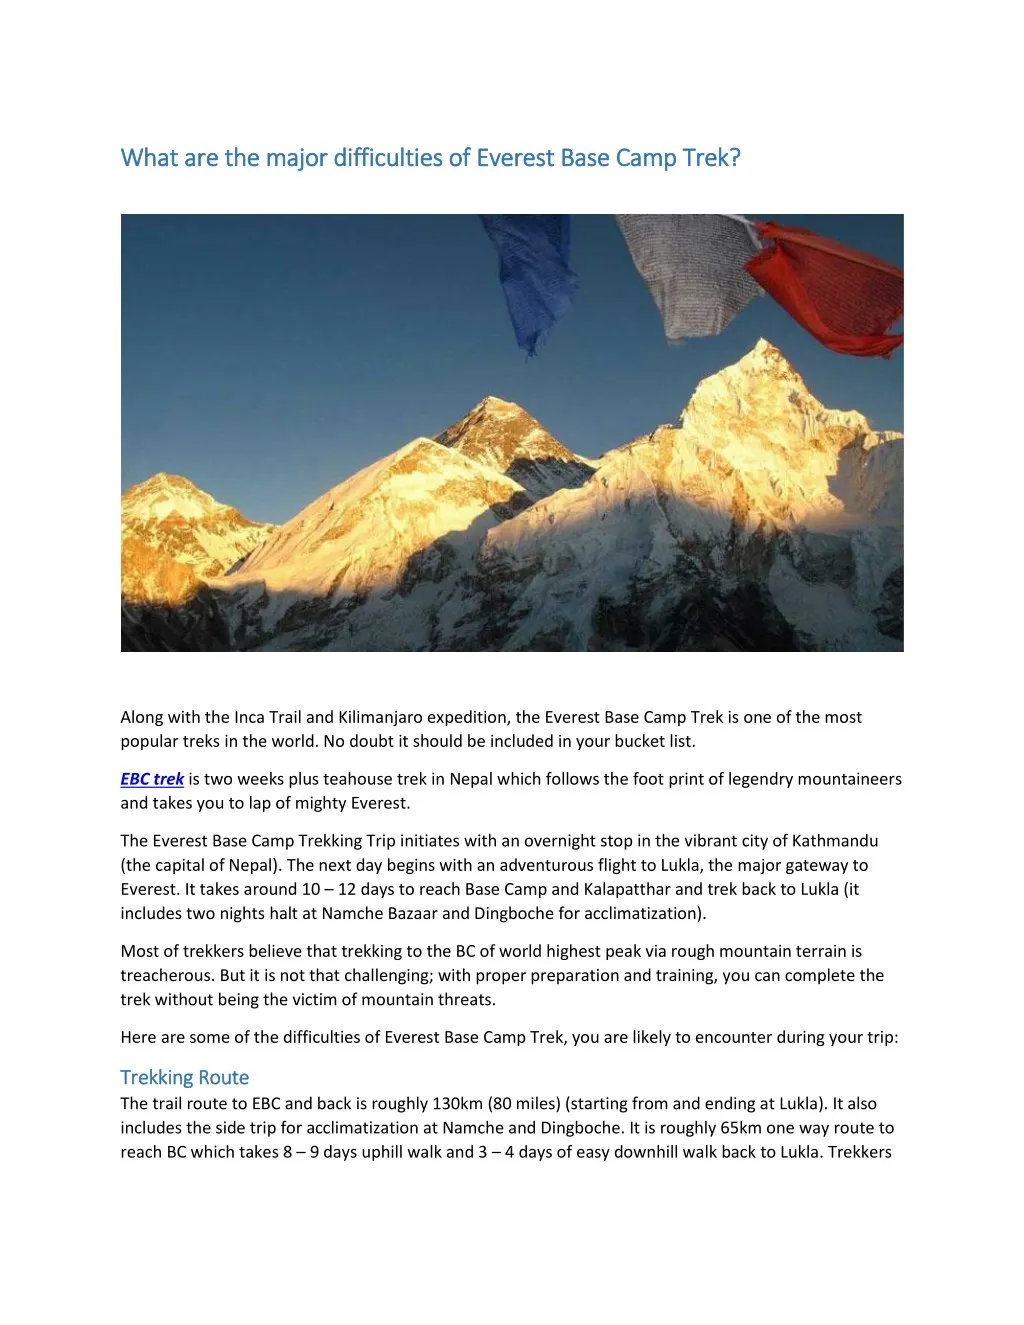 what are the major difficulties of everest base